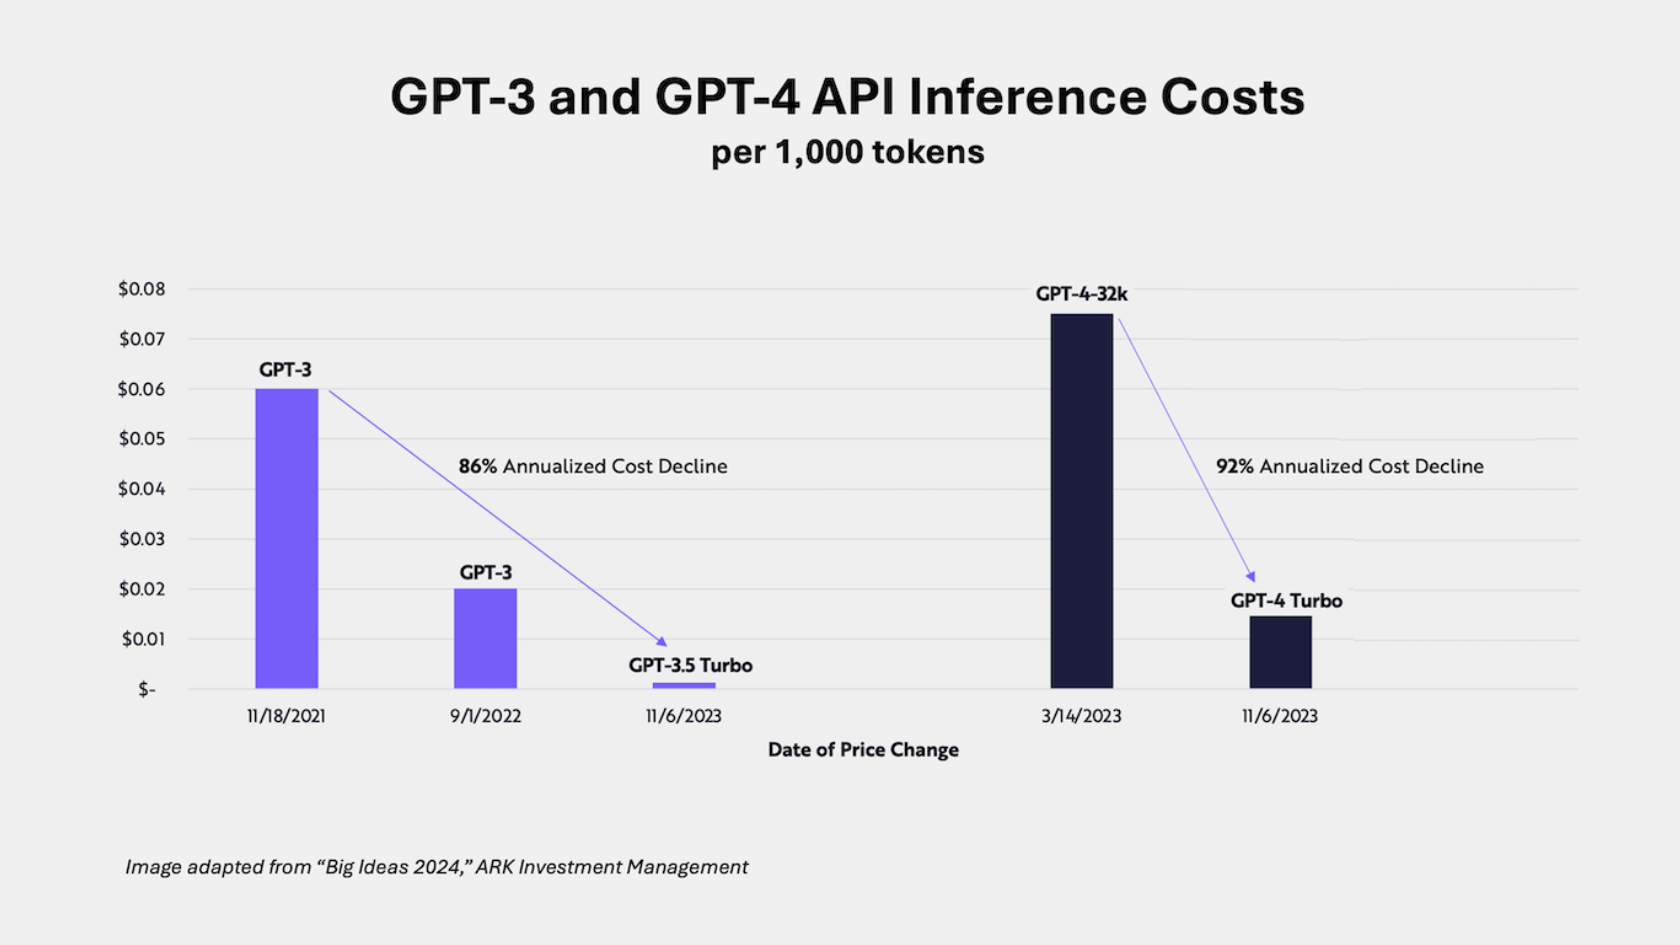 GPT-3 and GPT-4 API inference costs per 1,000 tokens